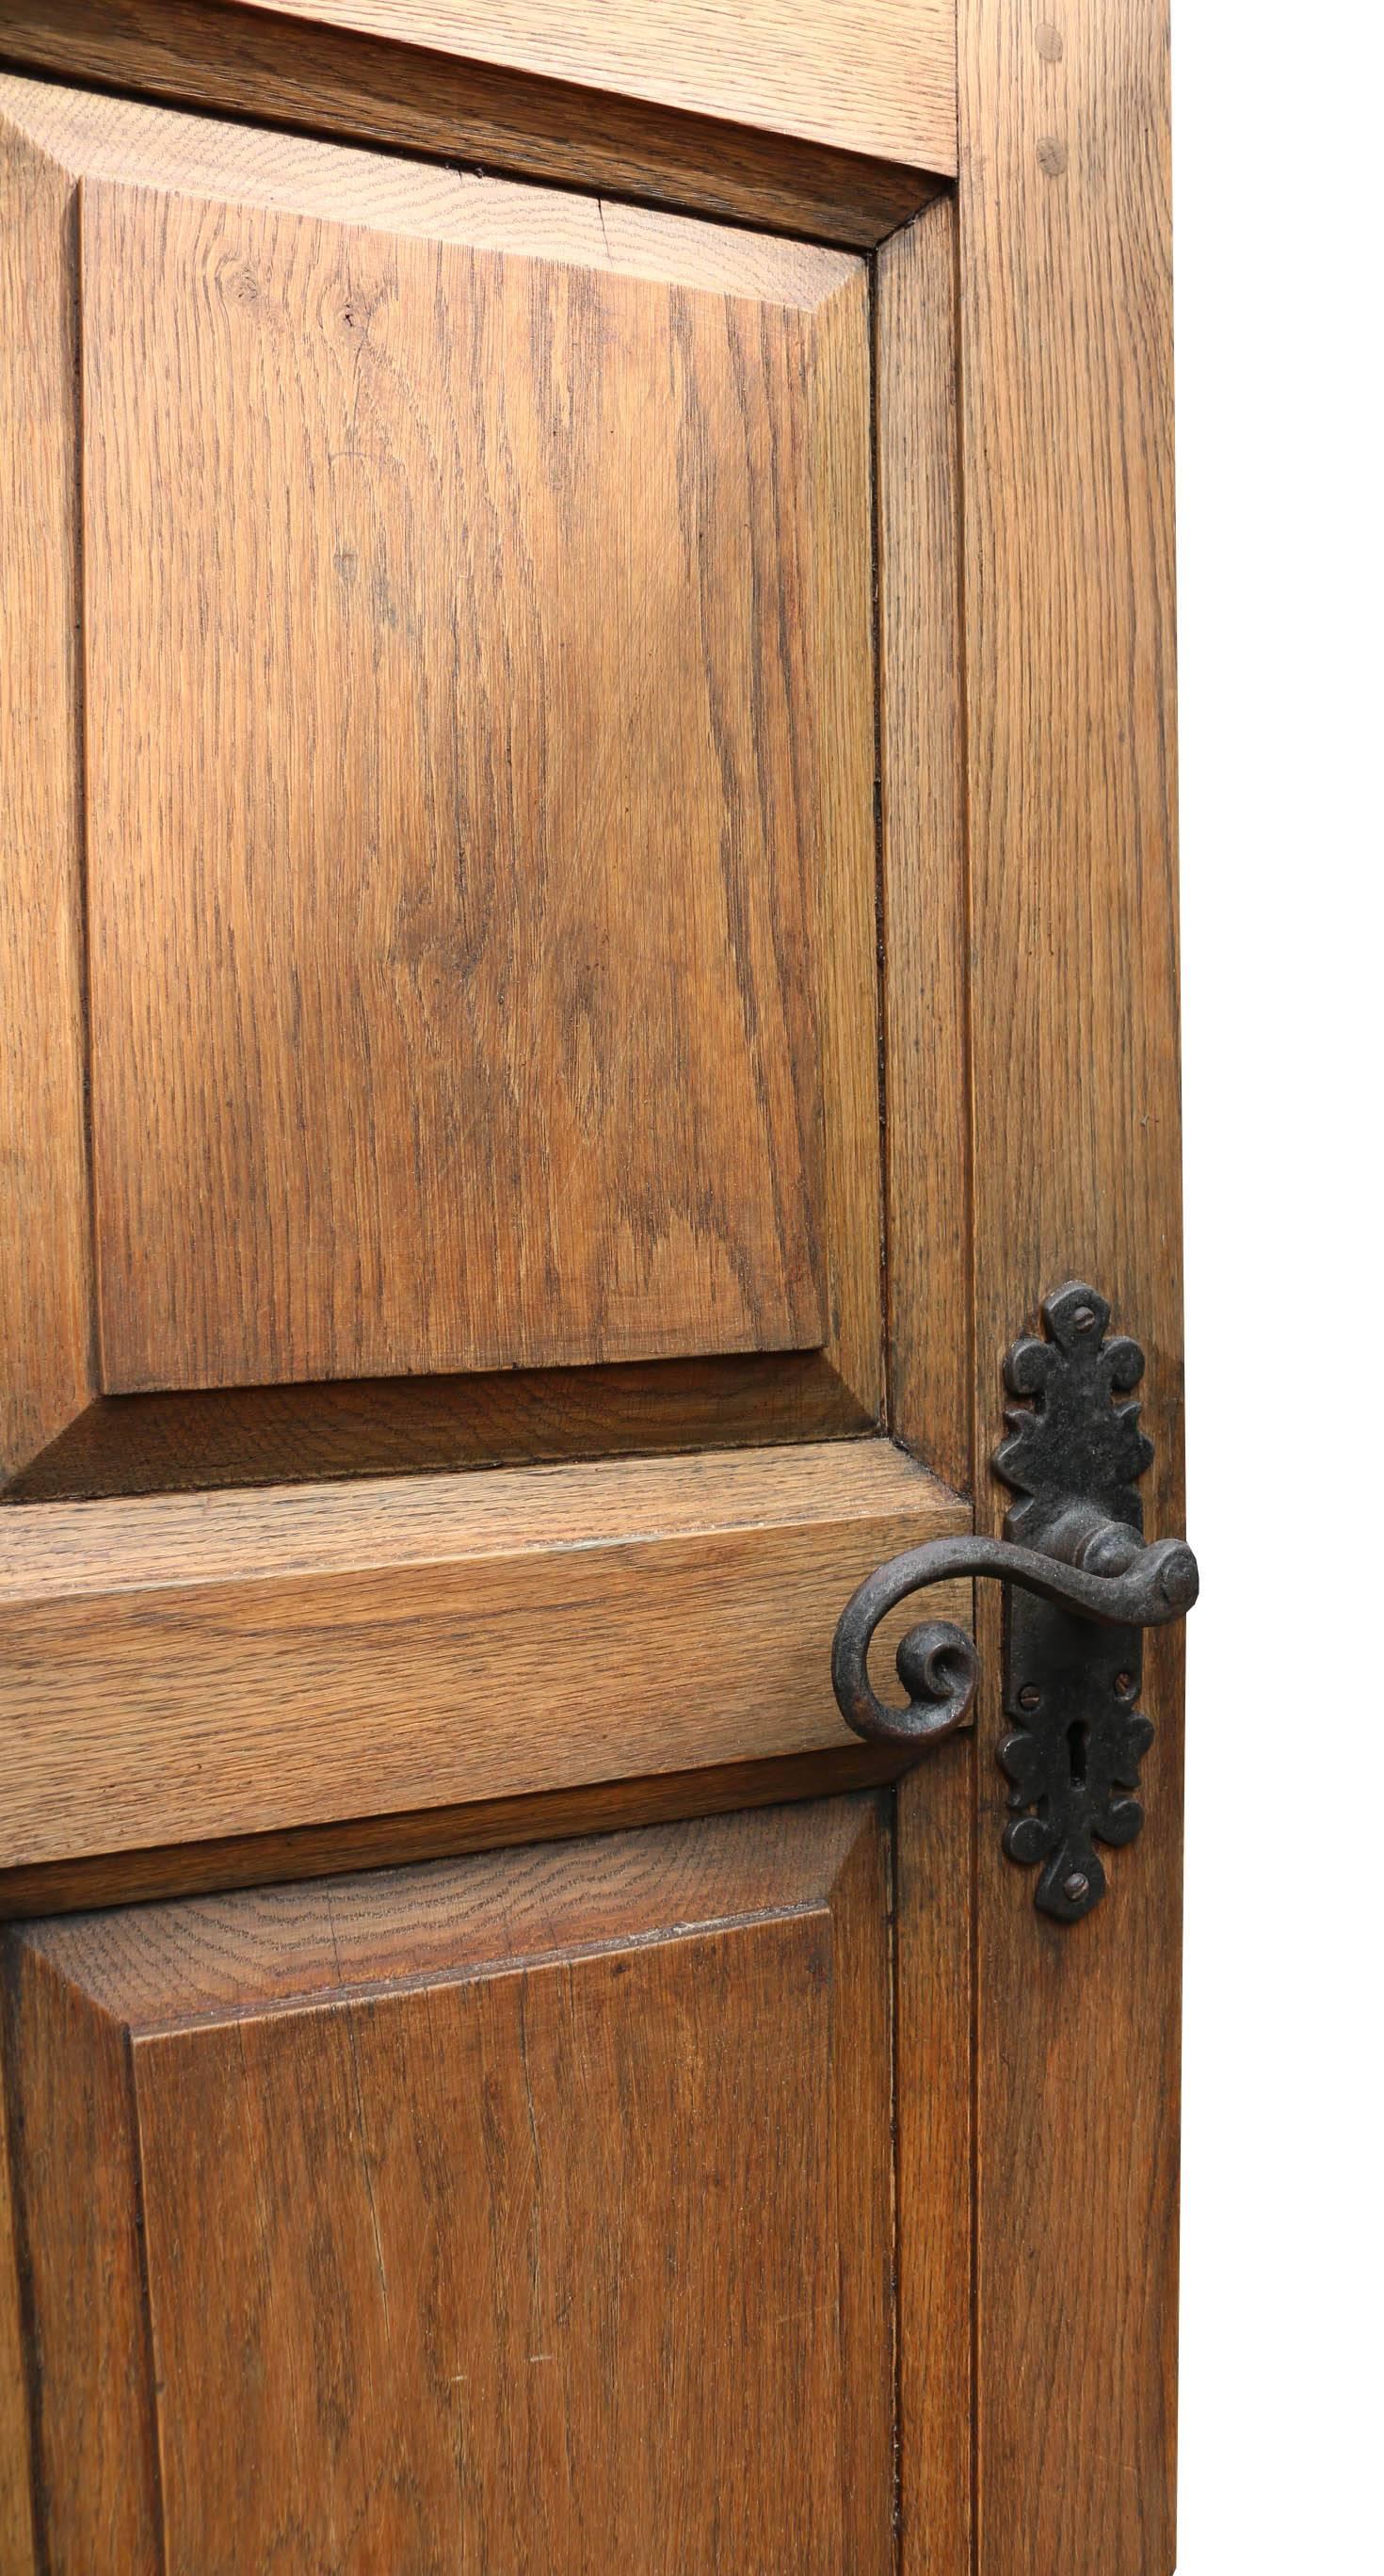 This door is in excellent condition and the cast iron knocker included.
Weight 43 kg.